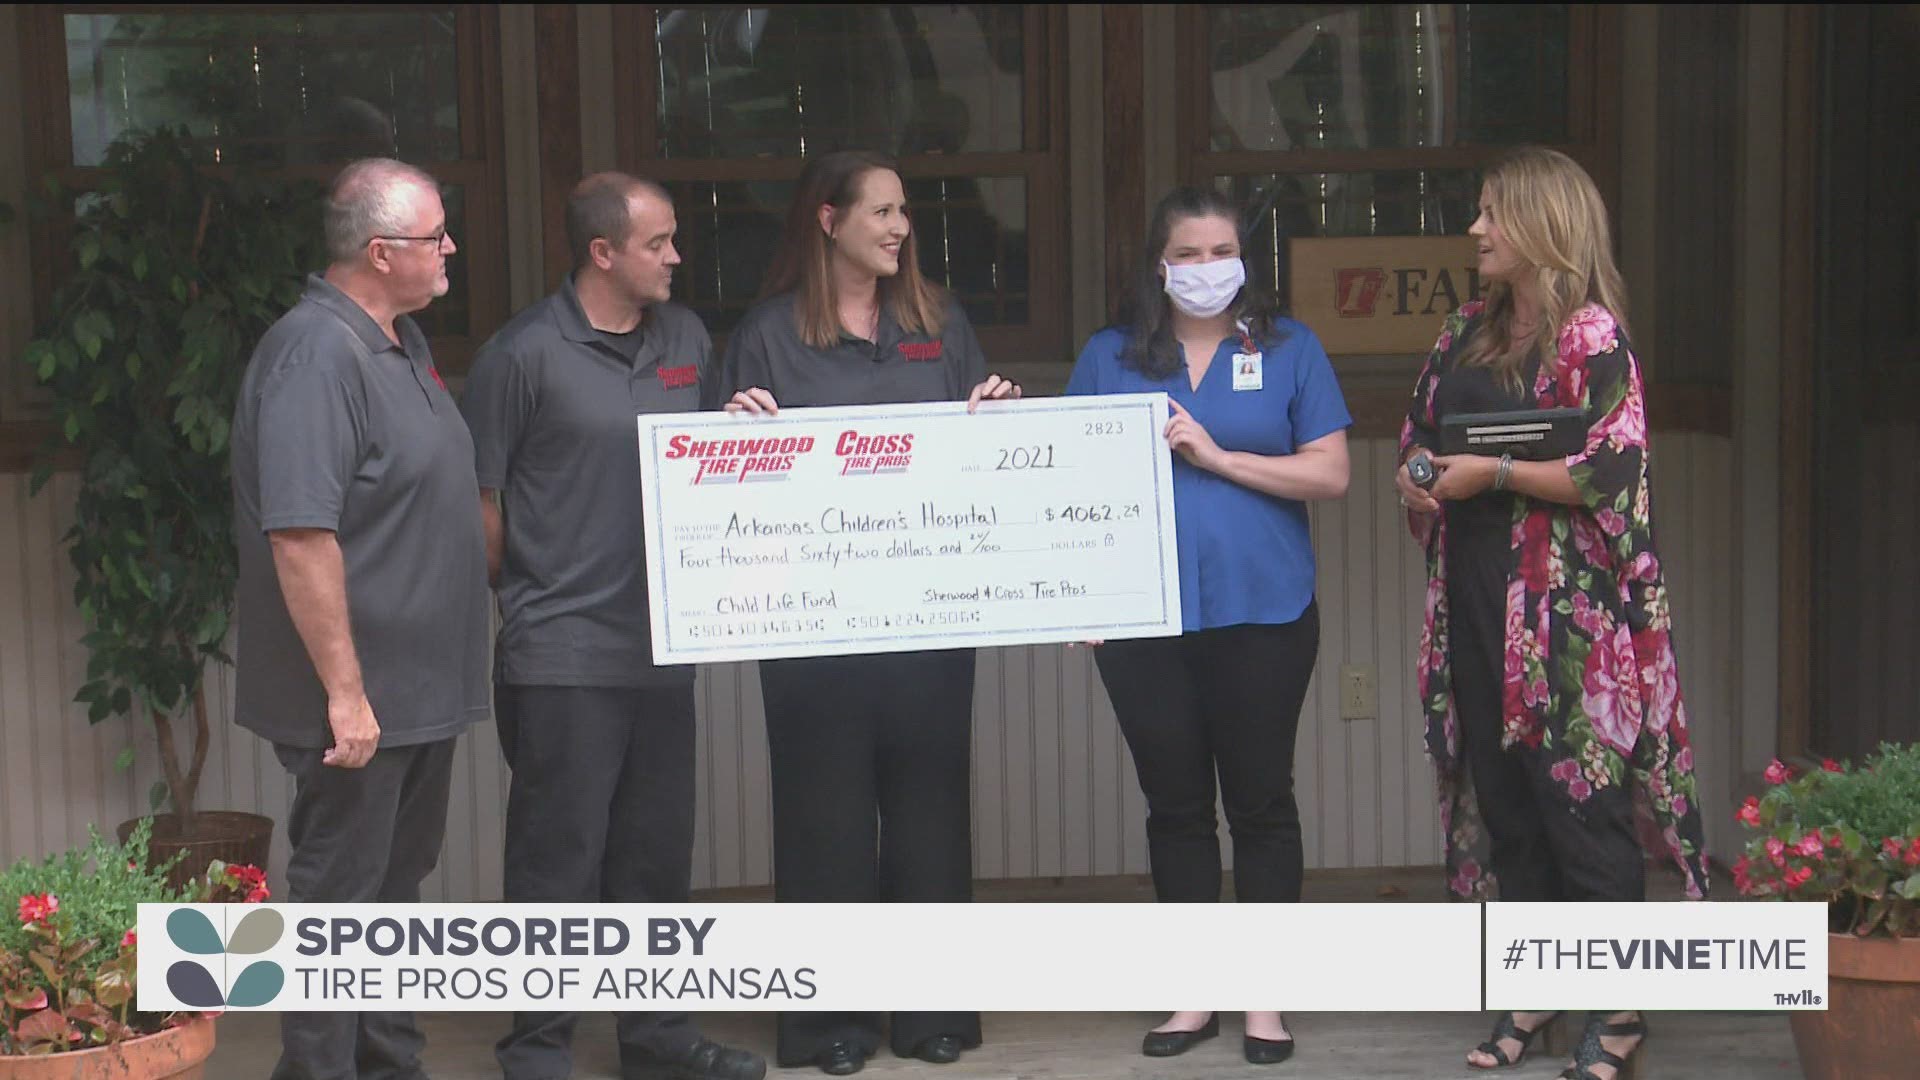 Arkansas Children’s Hospital does so much to help kids across the state and beyond, which is why Tire Pros wanted to give back and raise money to help patients.